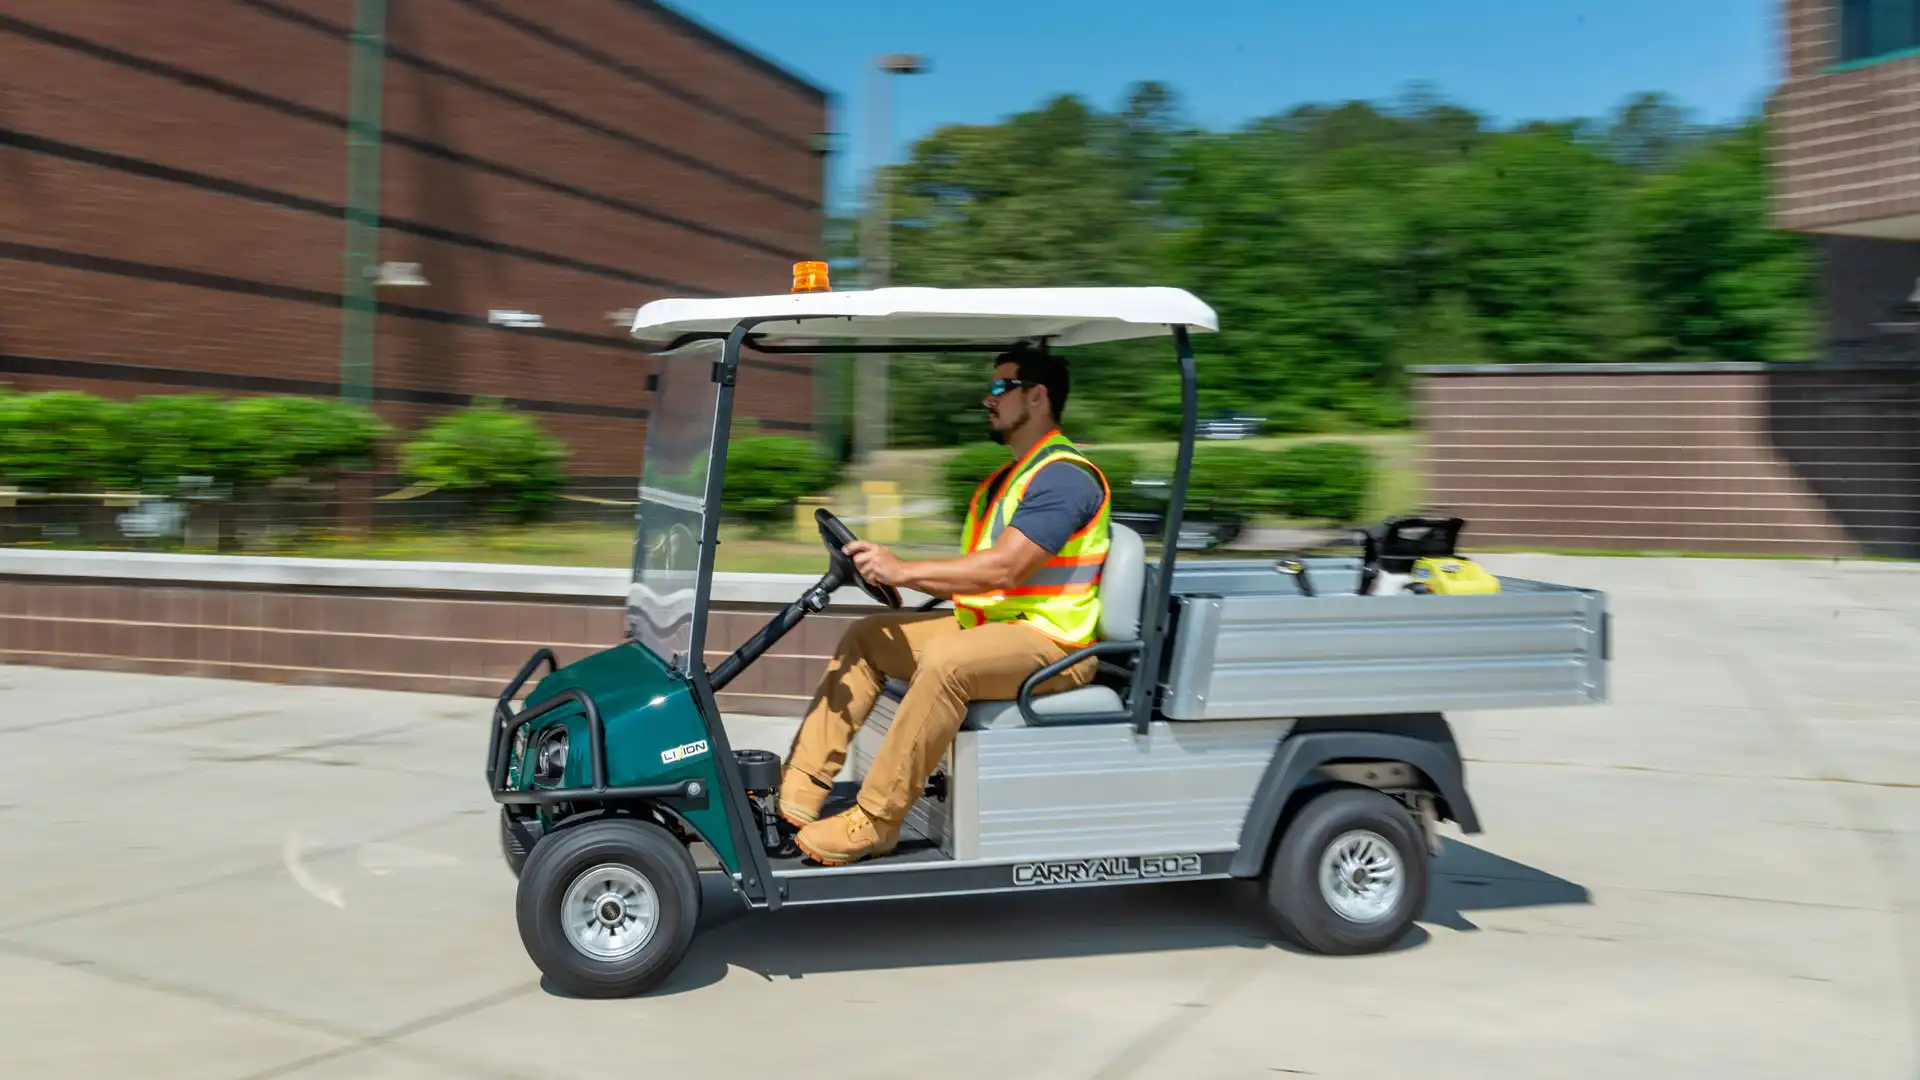 Carryall 502 work utility vehicle perfect for campus and facilities maintenance tasks